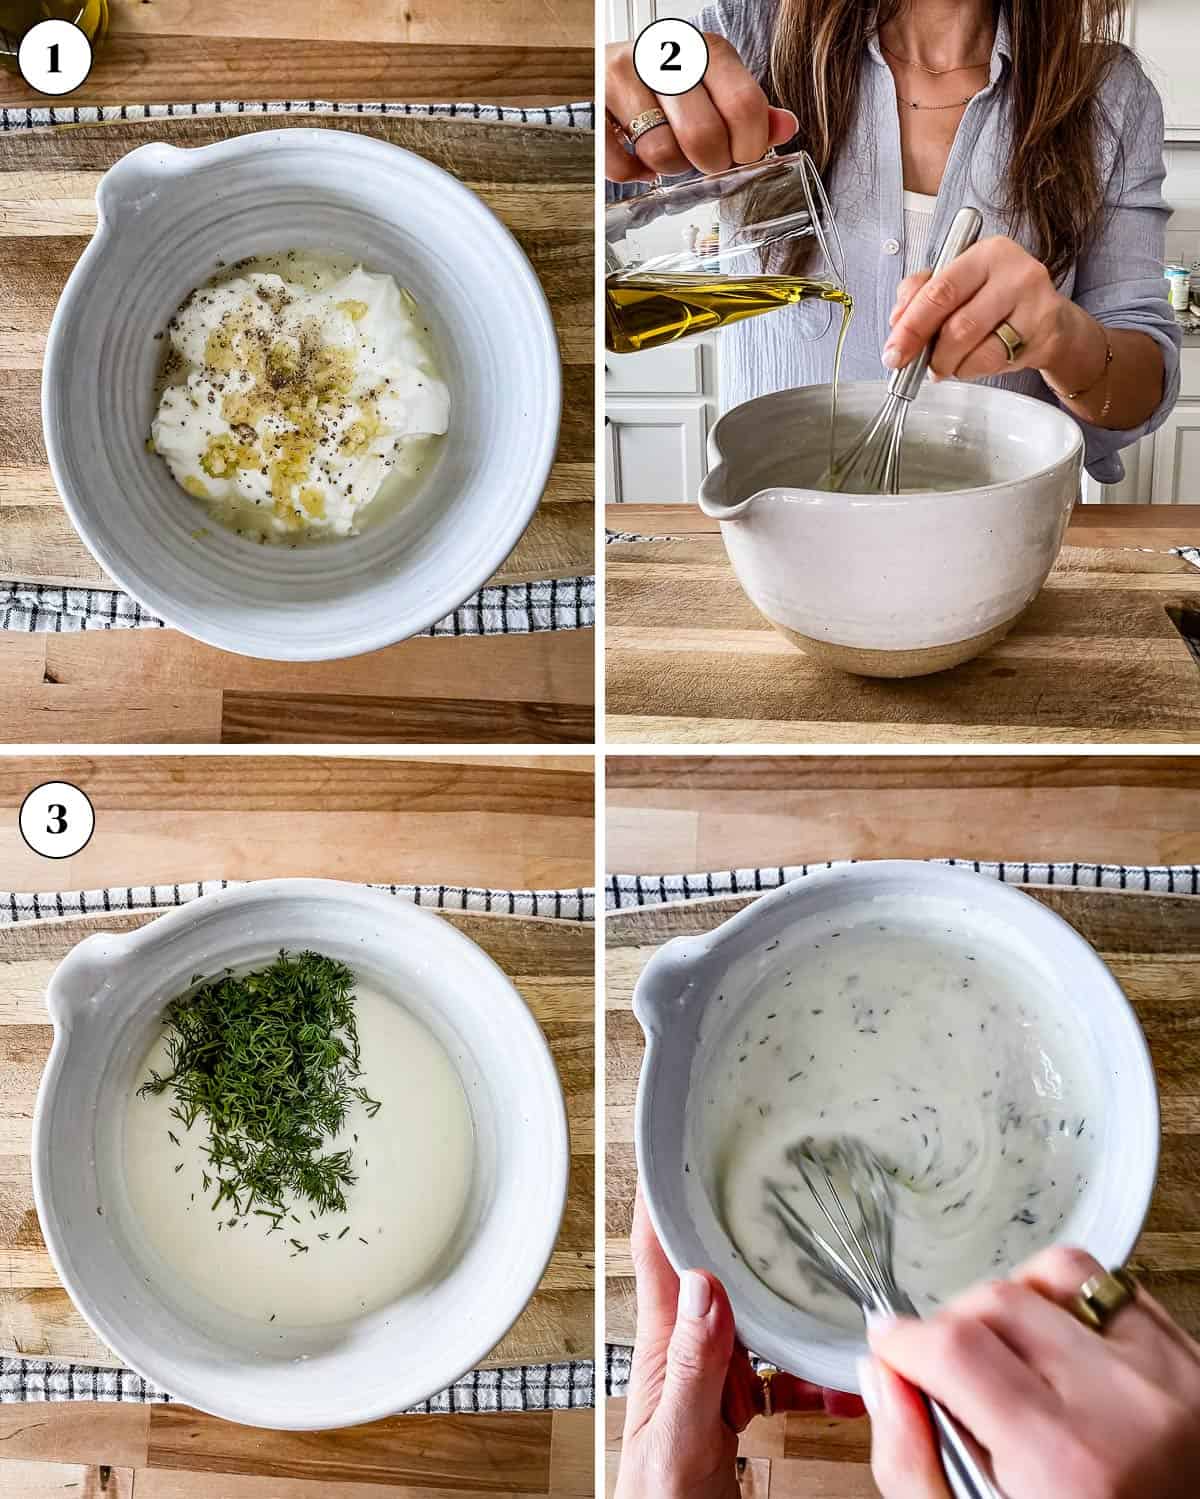 Person showing how to make creamy Greek dressing in a collage of images.